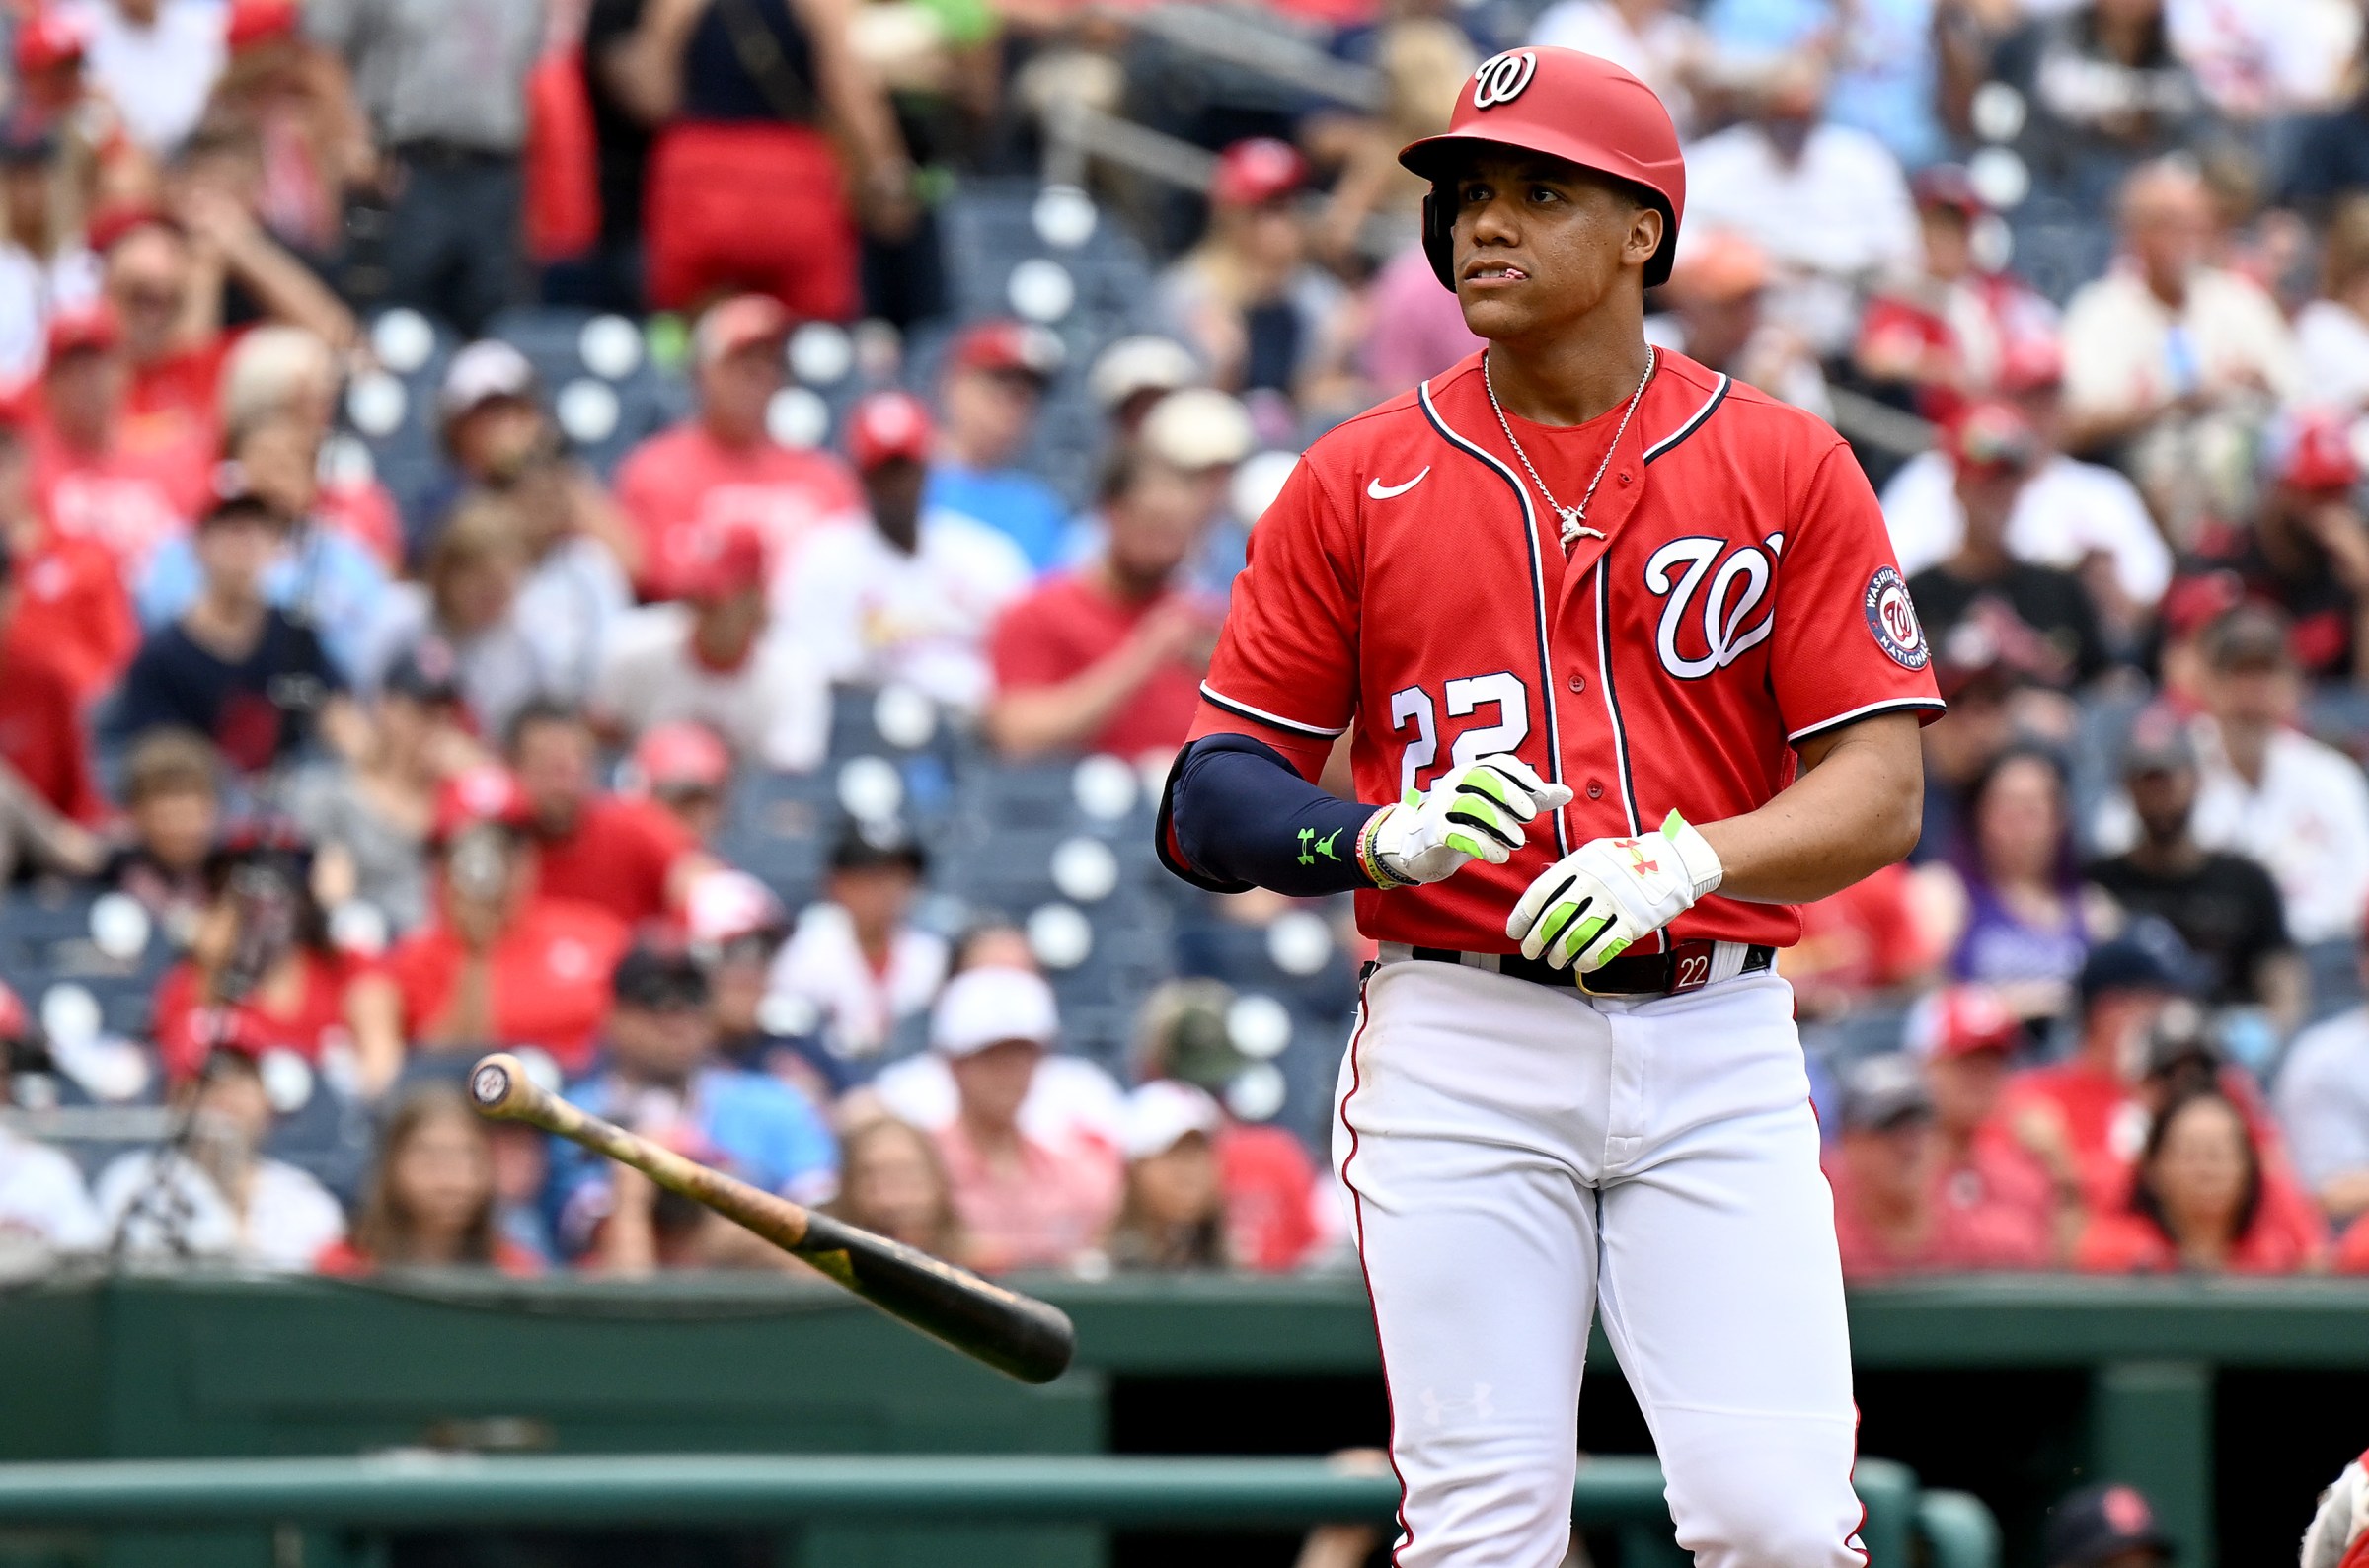 WASHINGTON, DC - JULY 31: Juan Soto #22 of the Washington Nationals tosses his bat after drawing a walk in the first inning against the St. Louis Cardinals at Nationals Park on July 31, 2022 in Washington, DC.